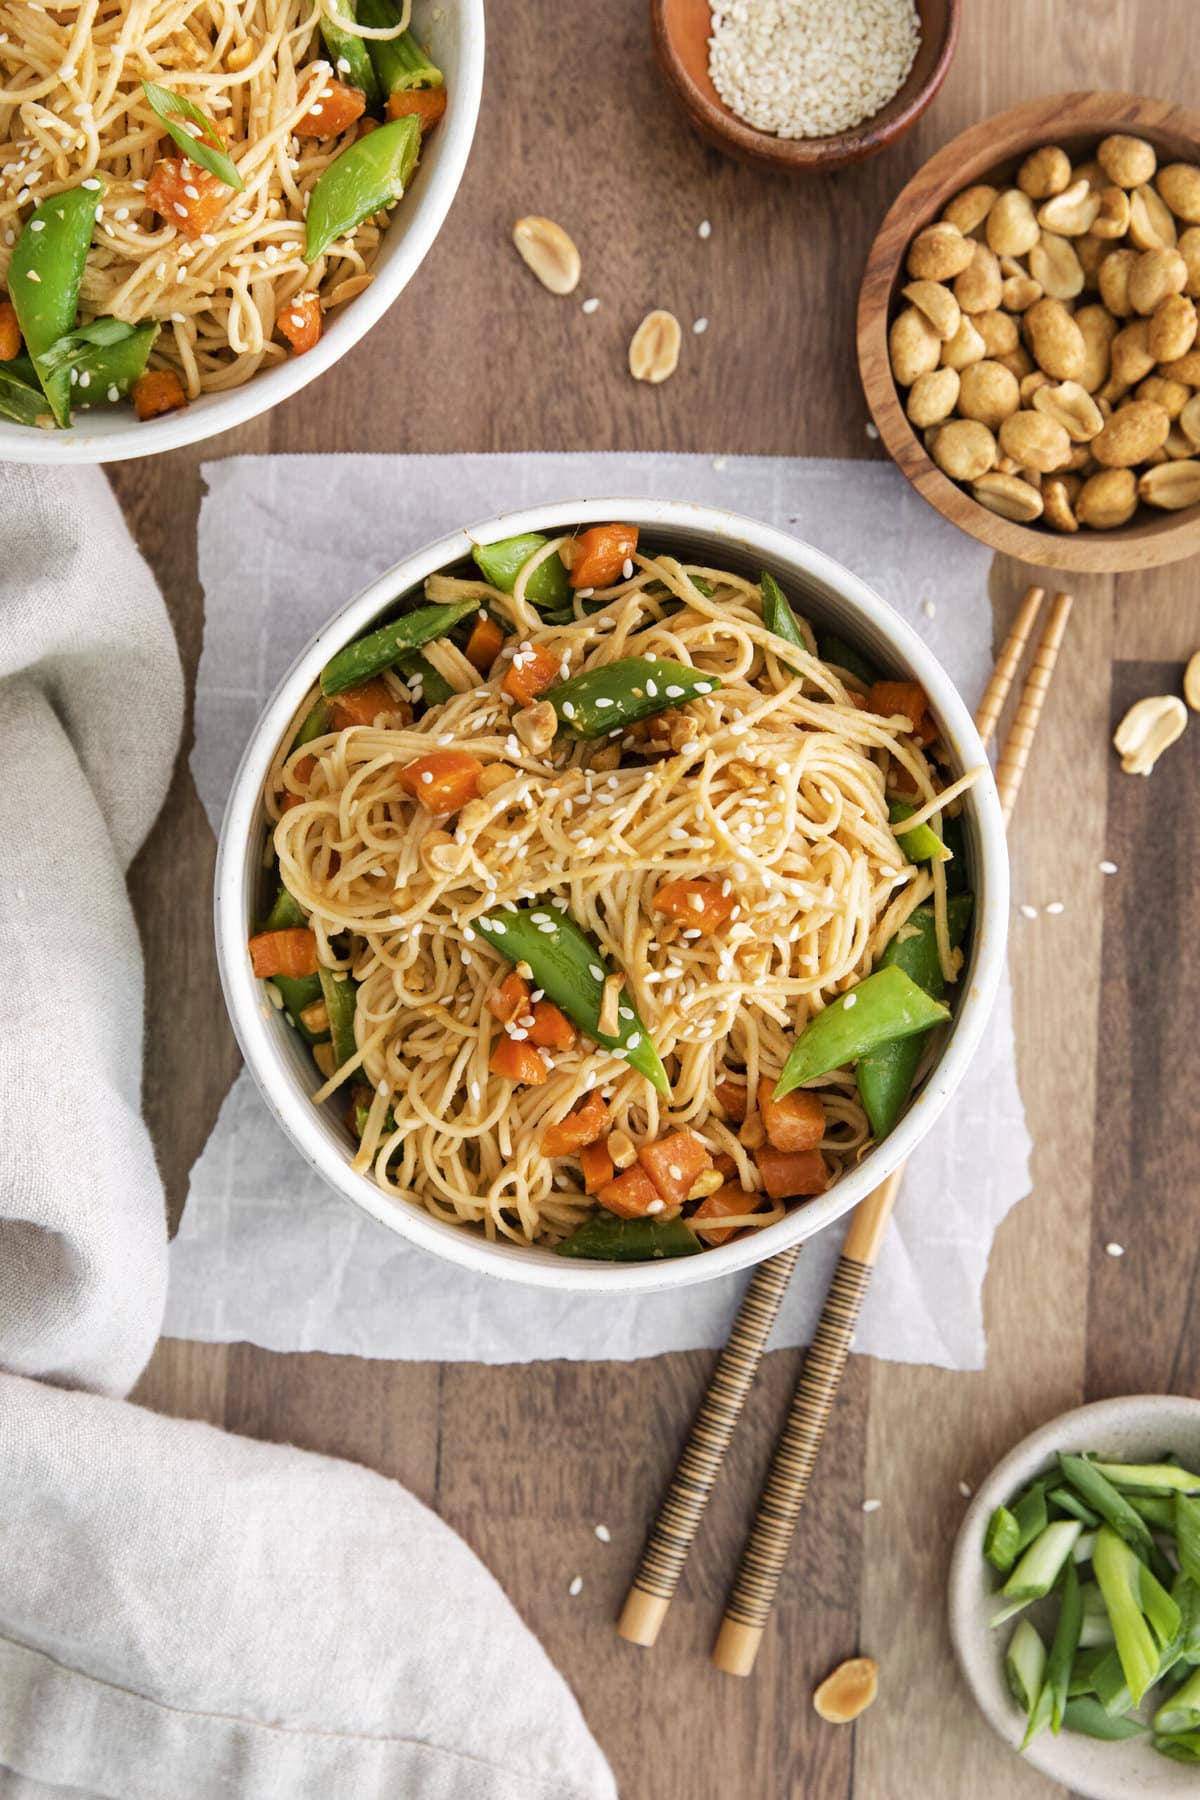 noodles, carrots, peas tossed in peanut sauce.